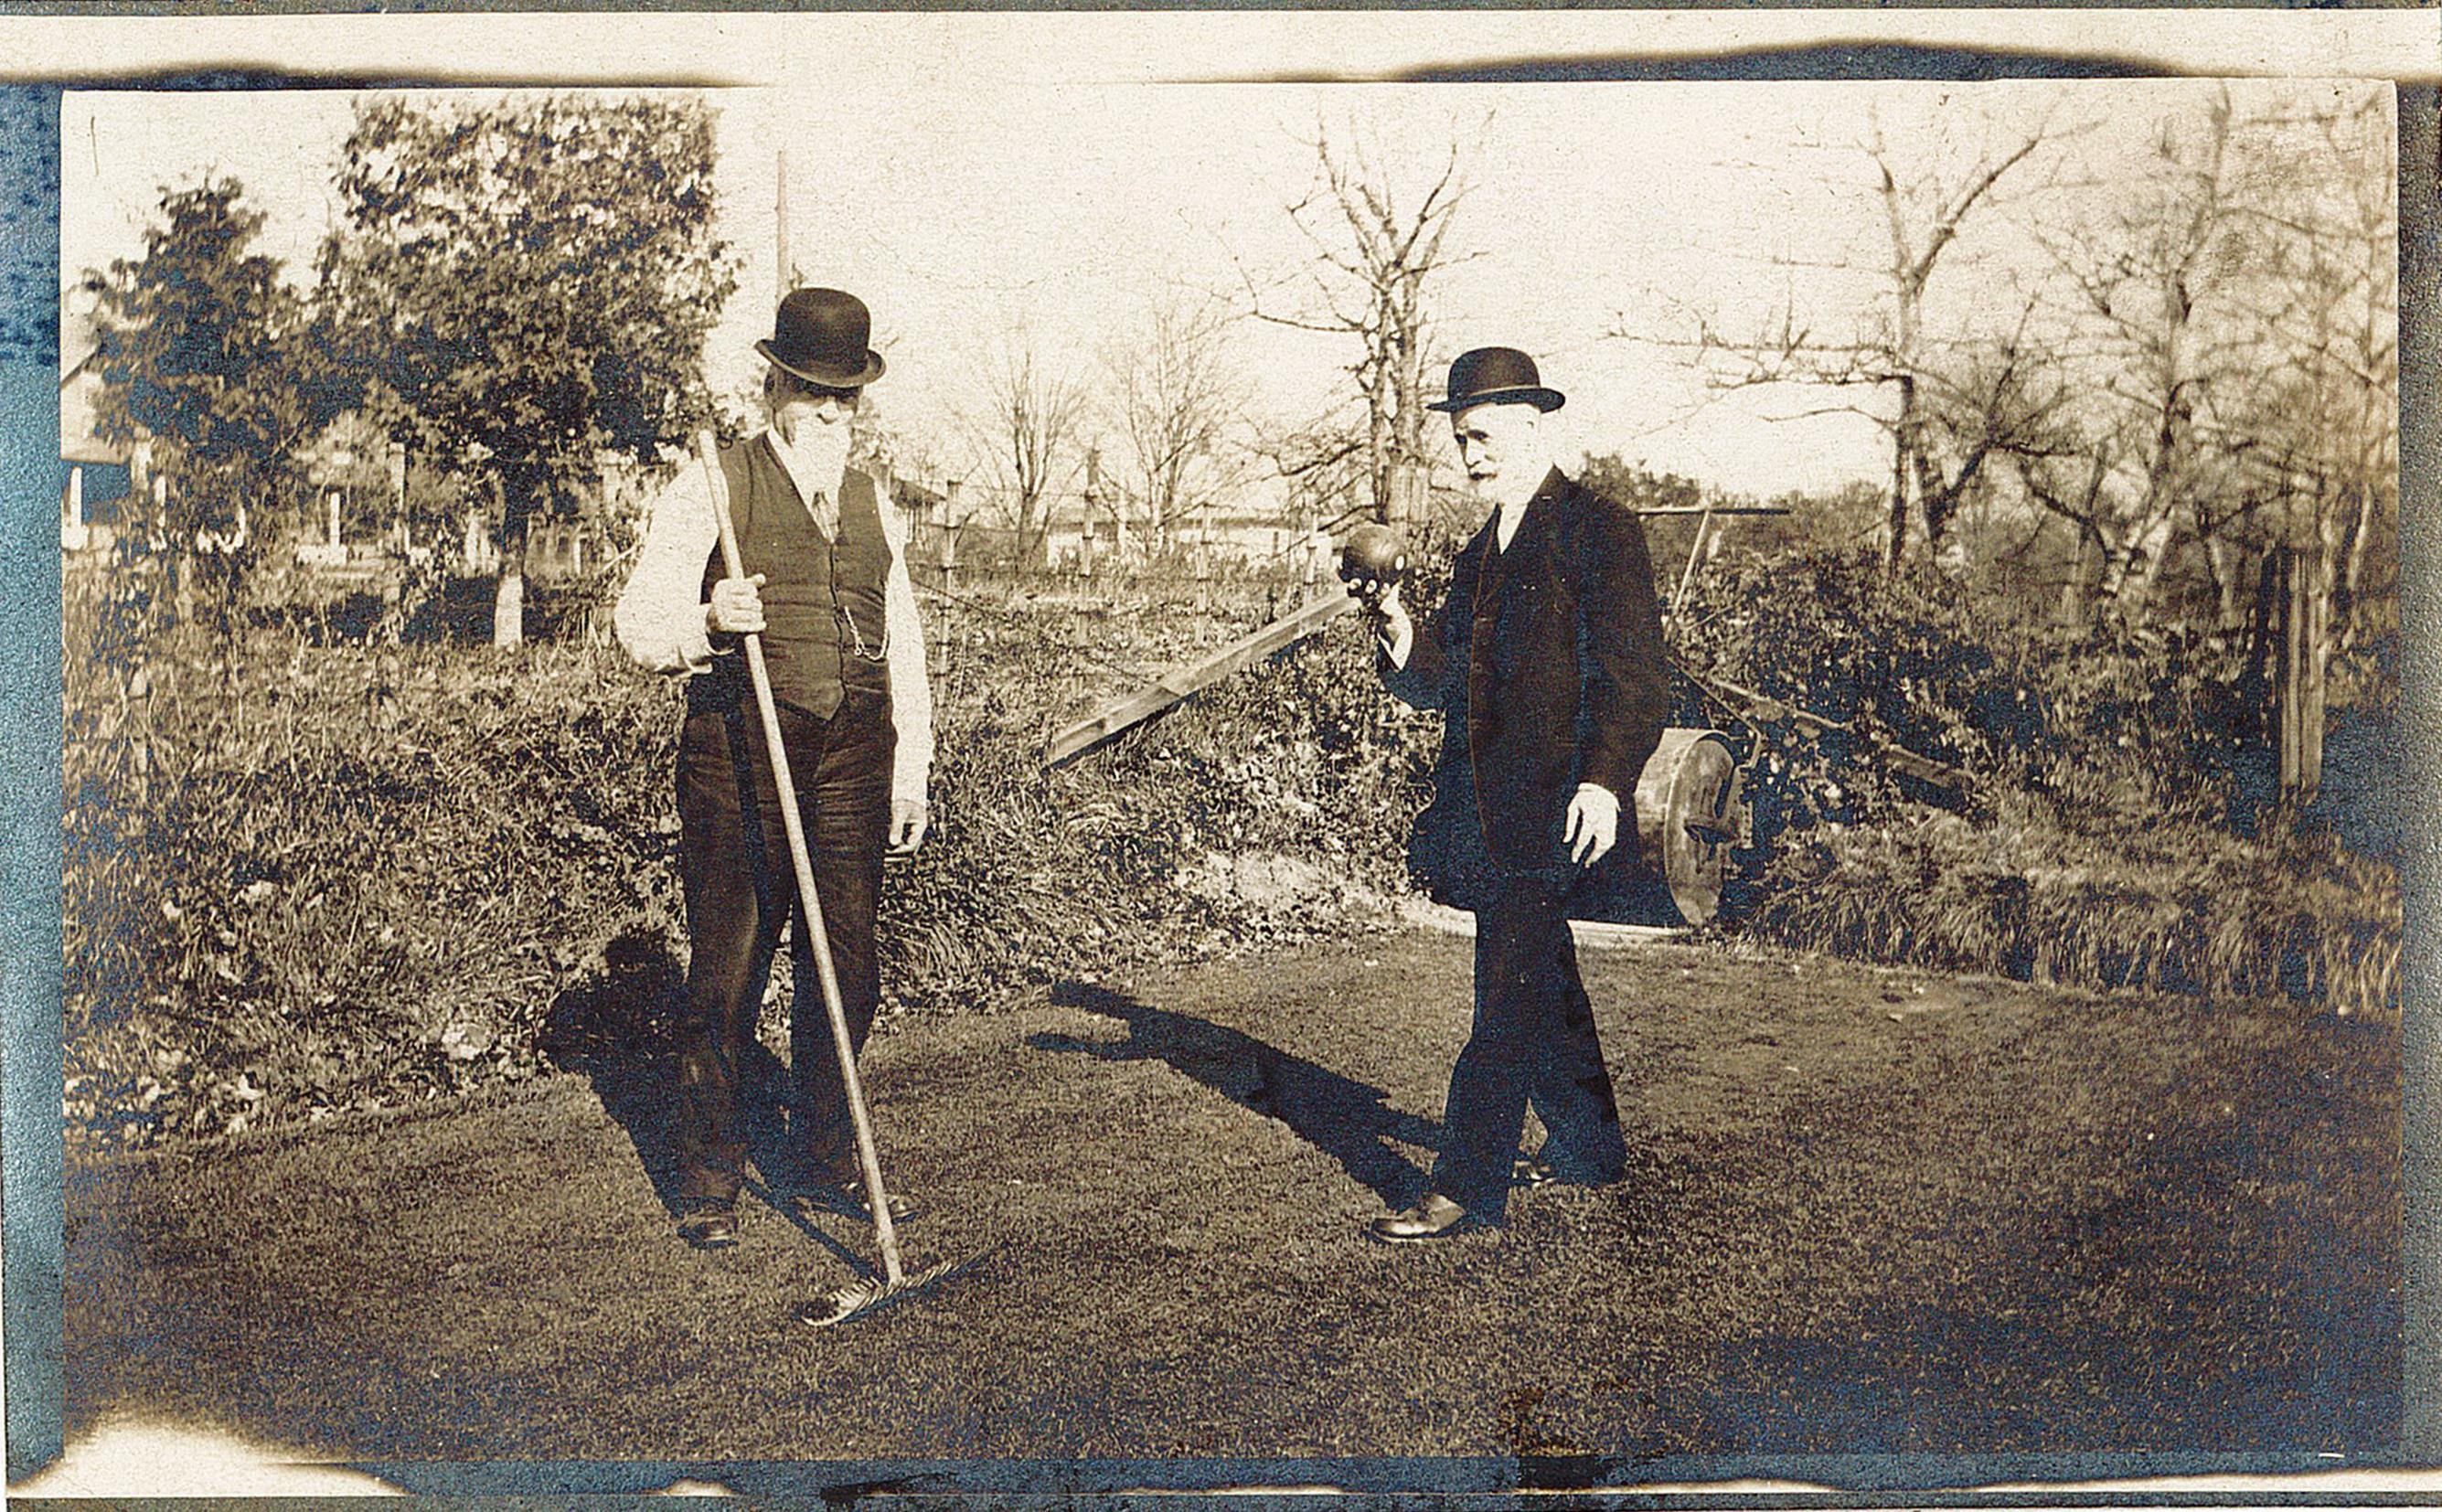 Photograph of two men playing lawn bowling. The man on the left is wearing a bowler hat and is dressed with a shirt, vest, and pants. He is holding a rake. The second man is holding a lawn bowling ball and is ready to roll the ball. He is also wearing a bowler hat and a suit.